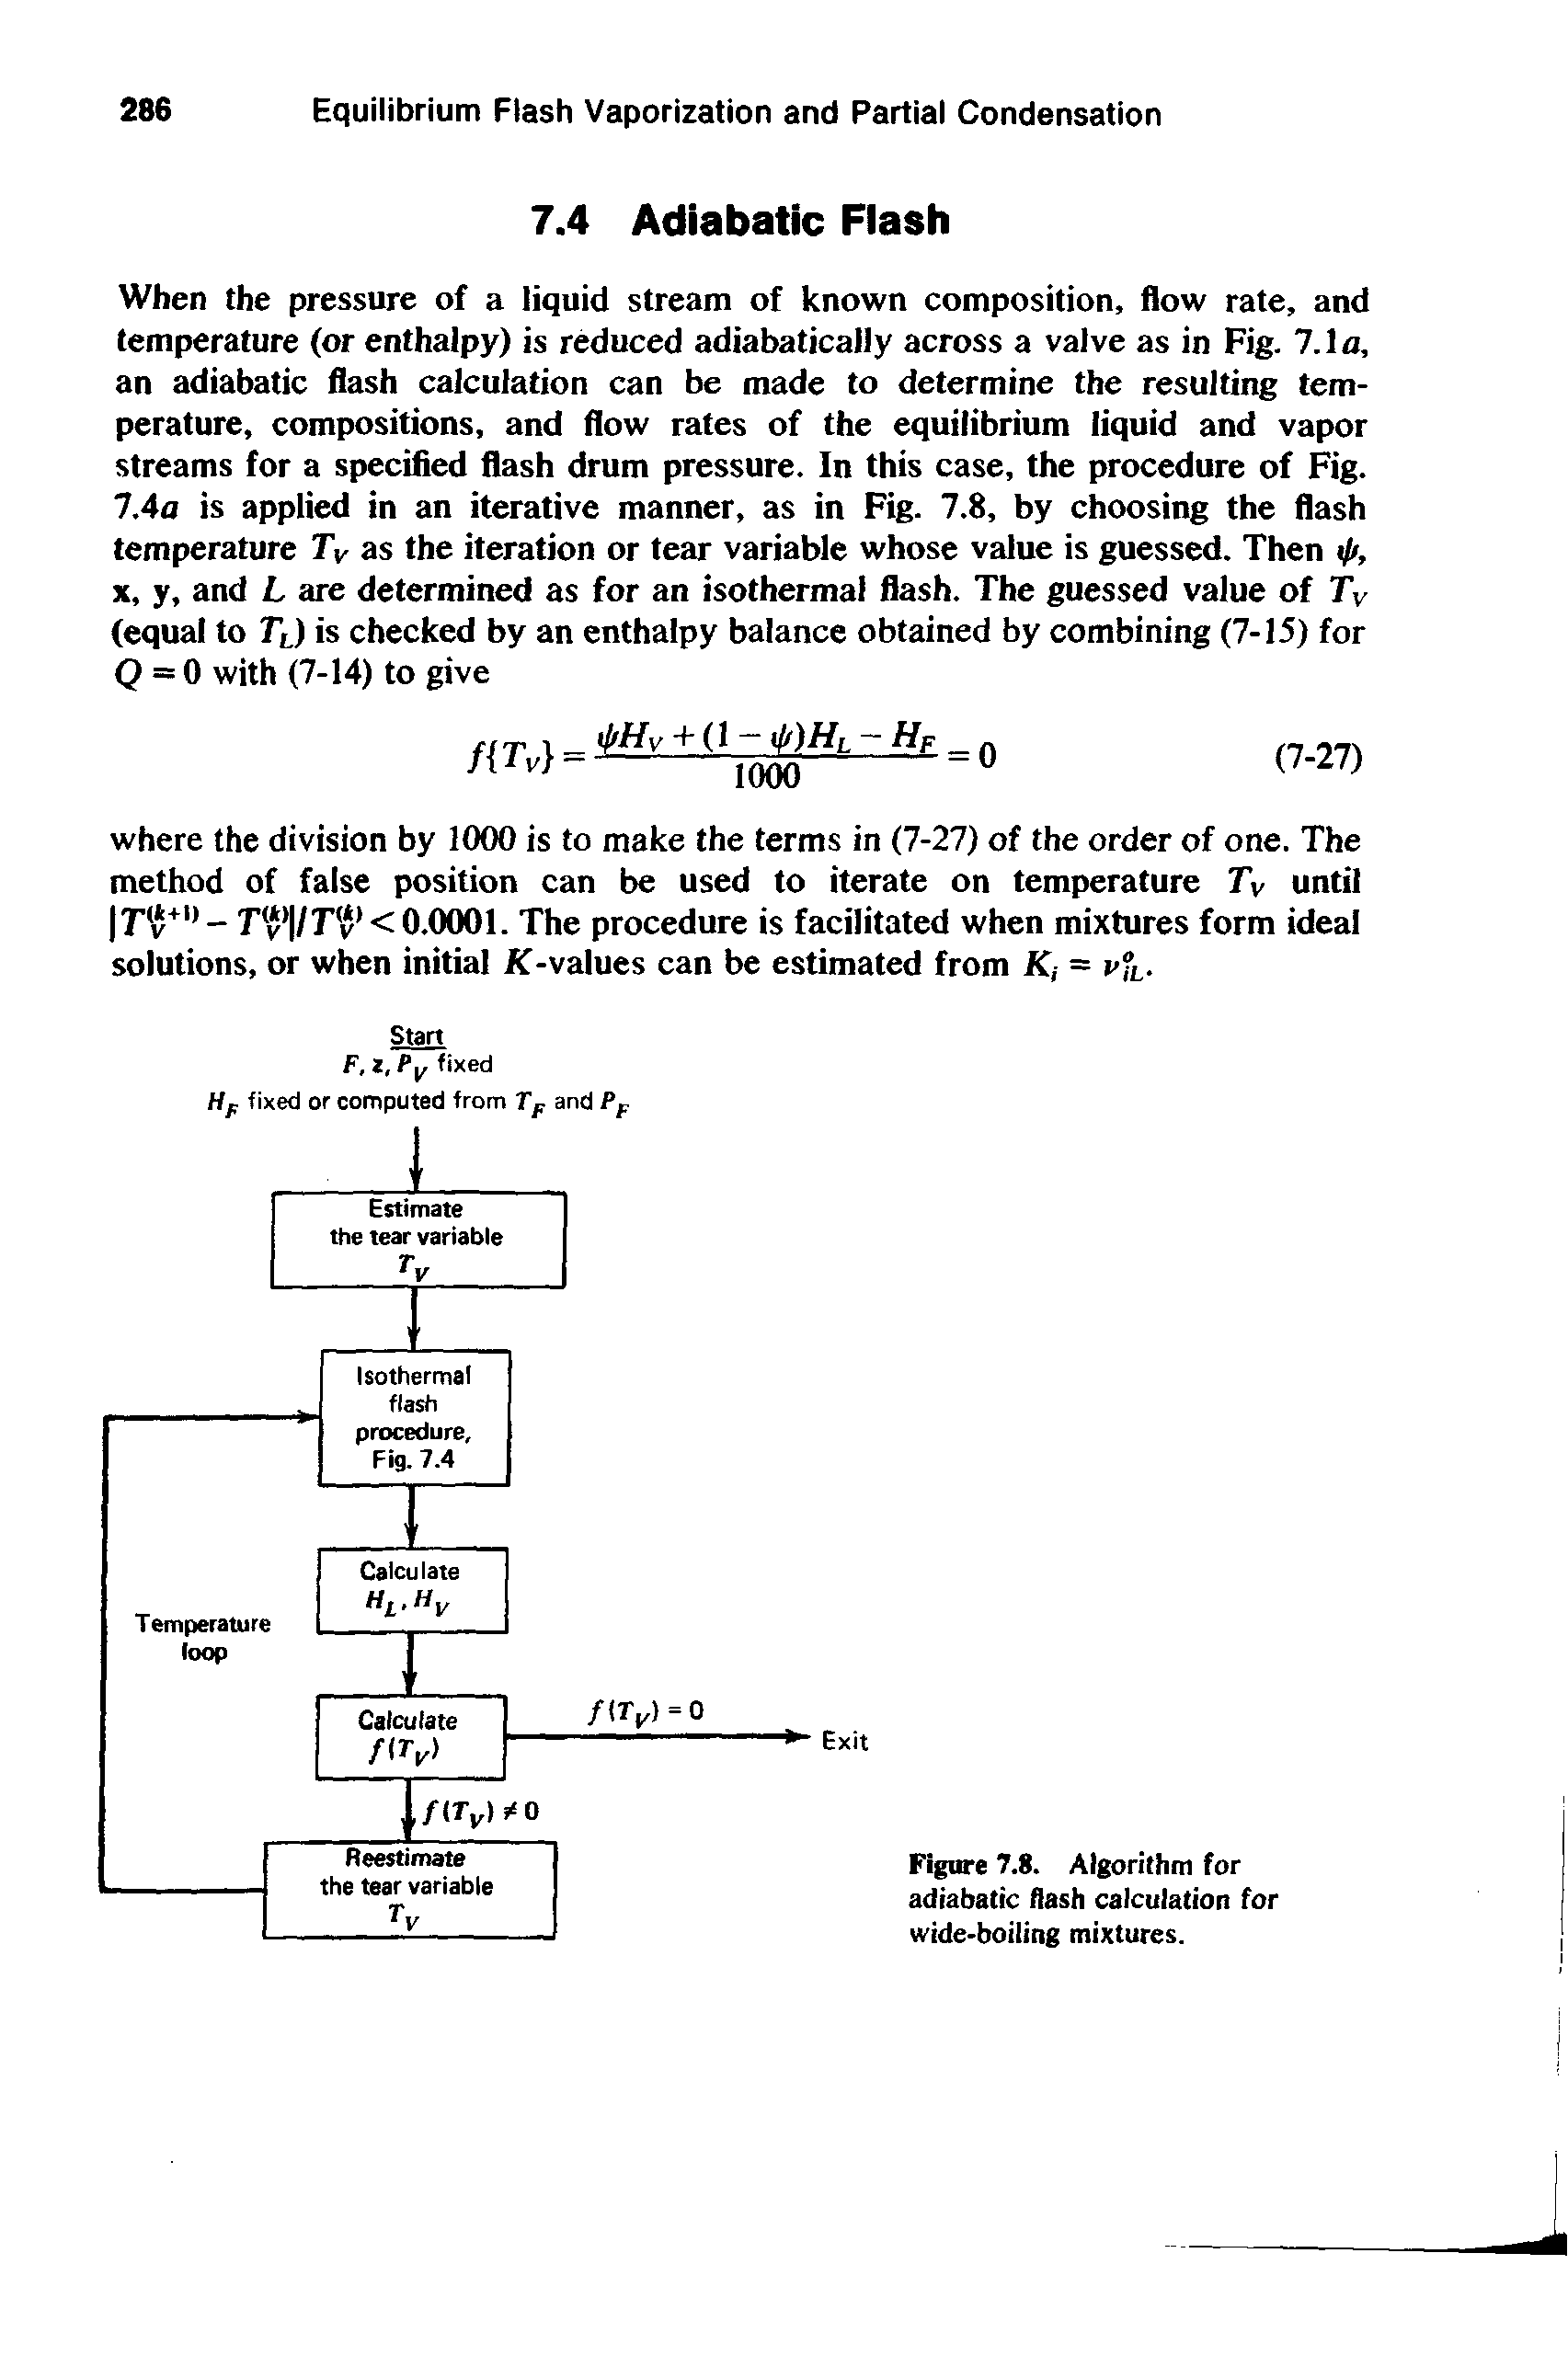 Figure 7.8. Algorithm for adiabatic flash calculation for wide-boiling mixtures.